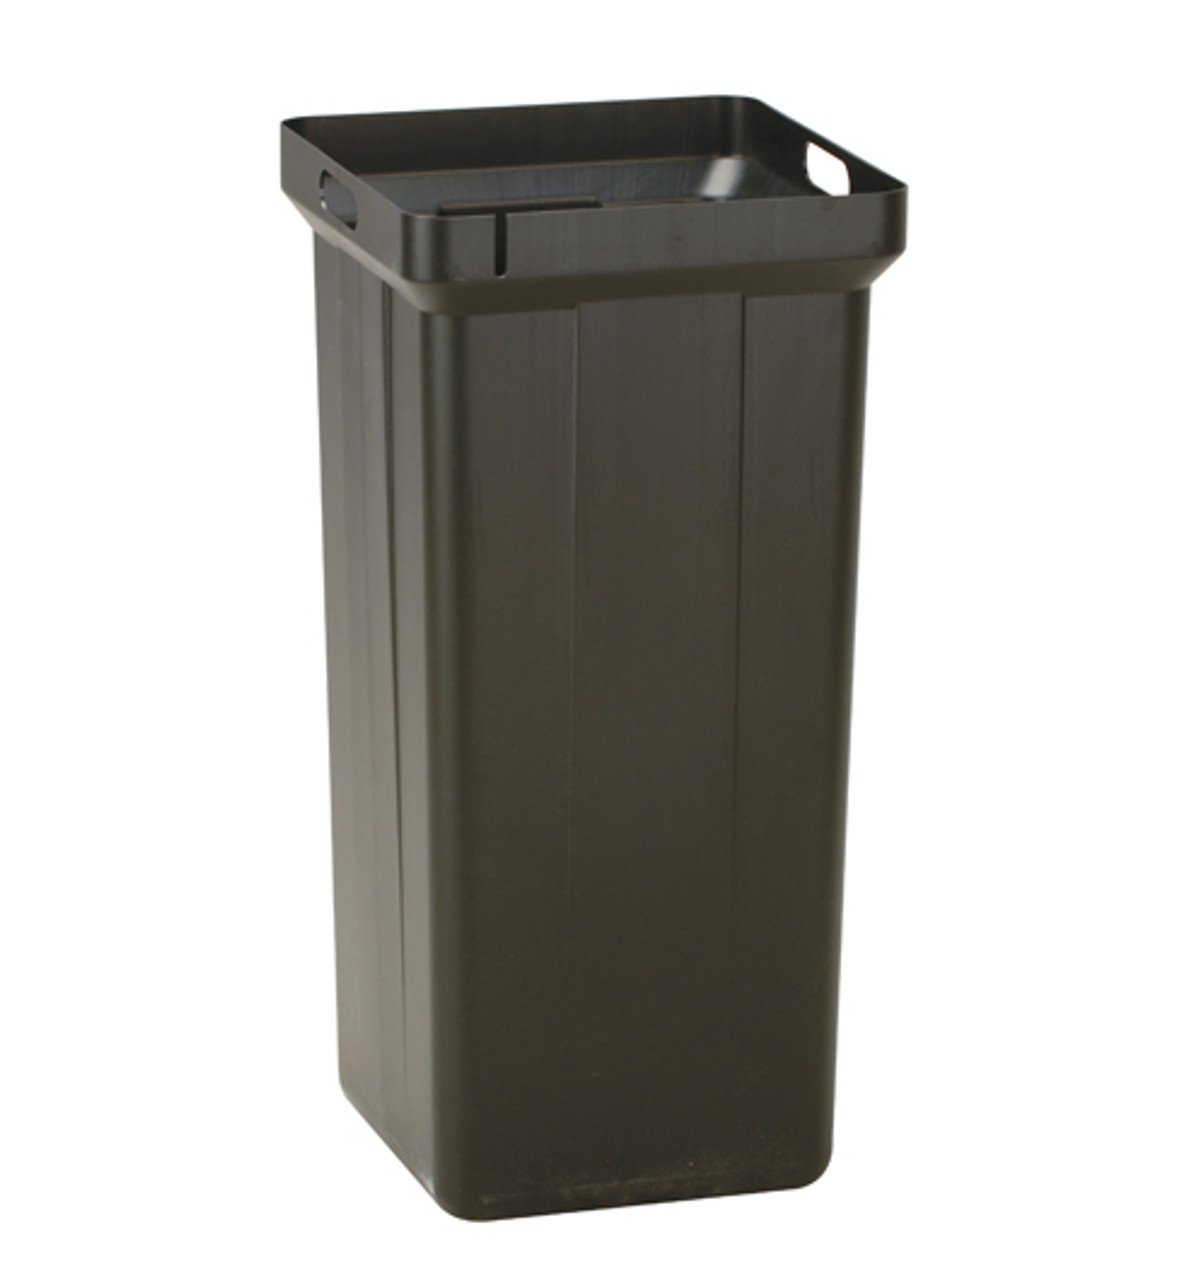 42 Gallon Liner 734401 for Commercial Zone Square Trash Cans